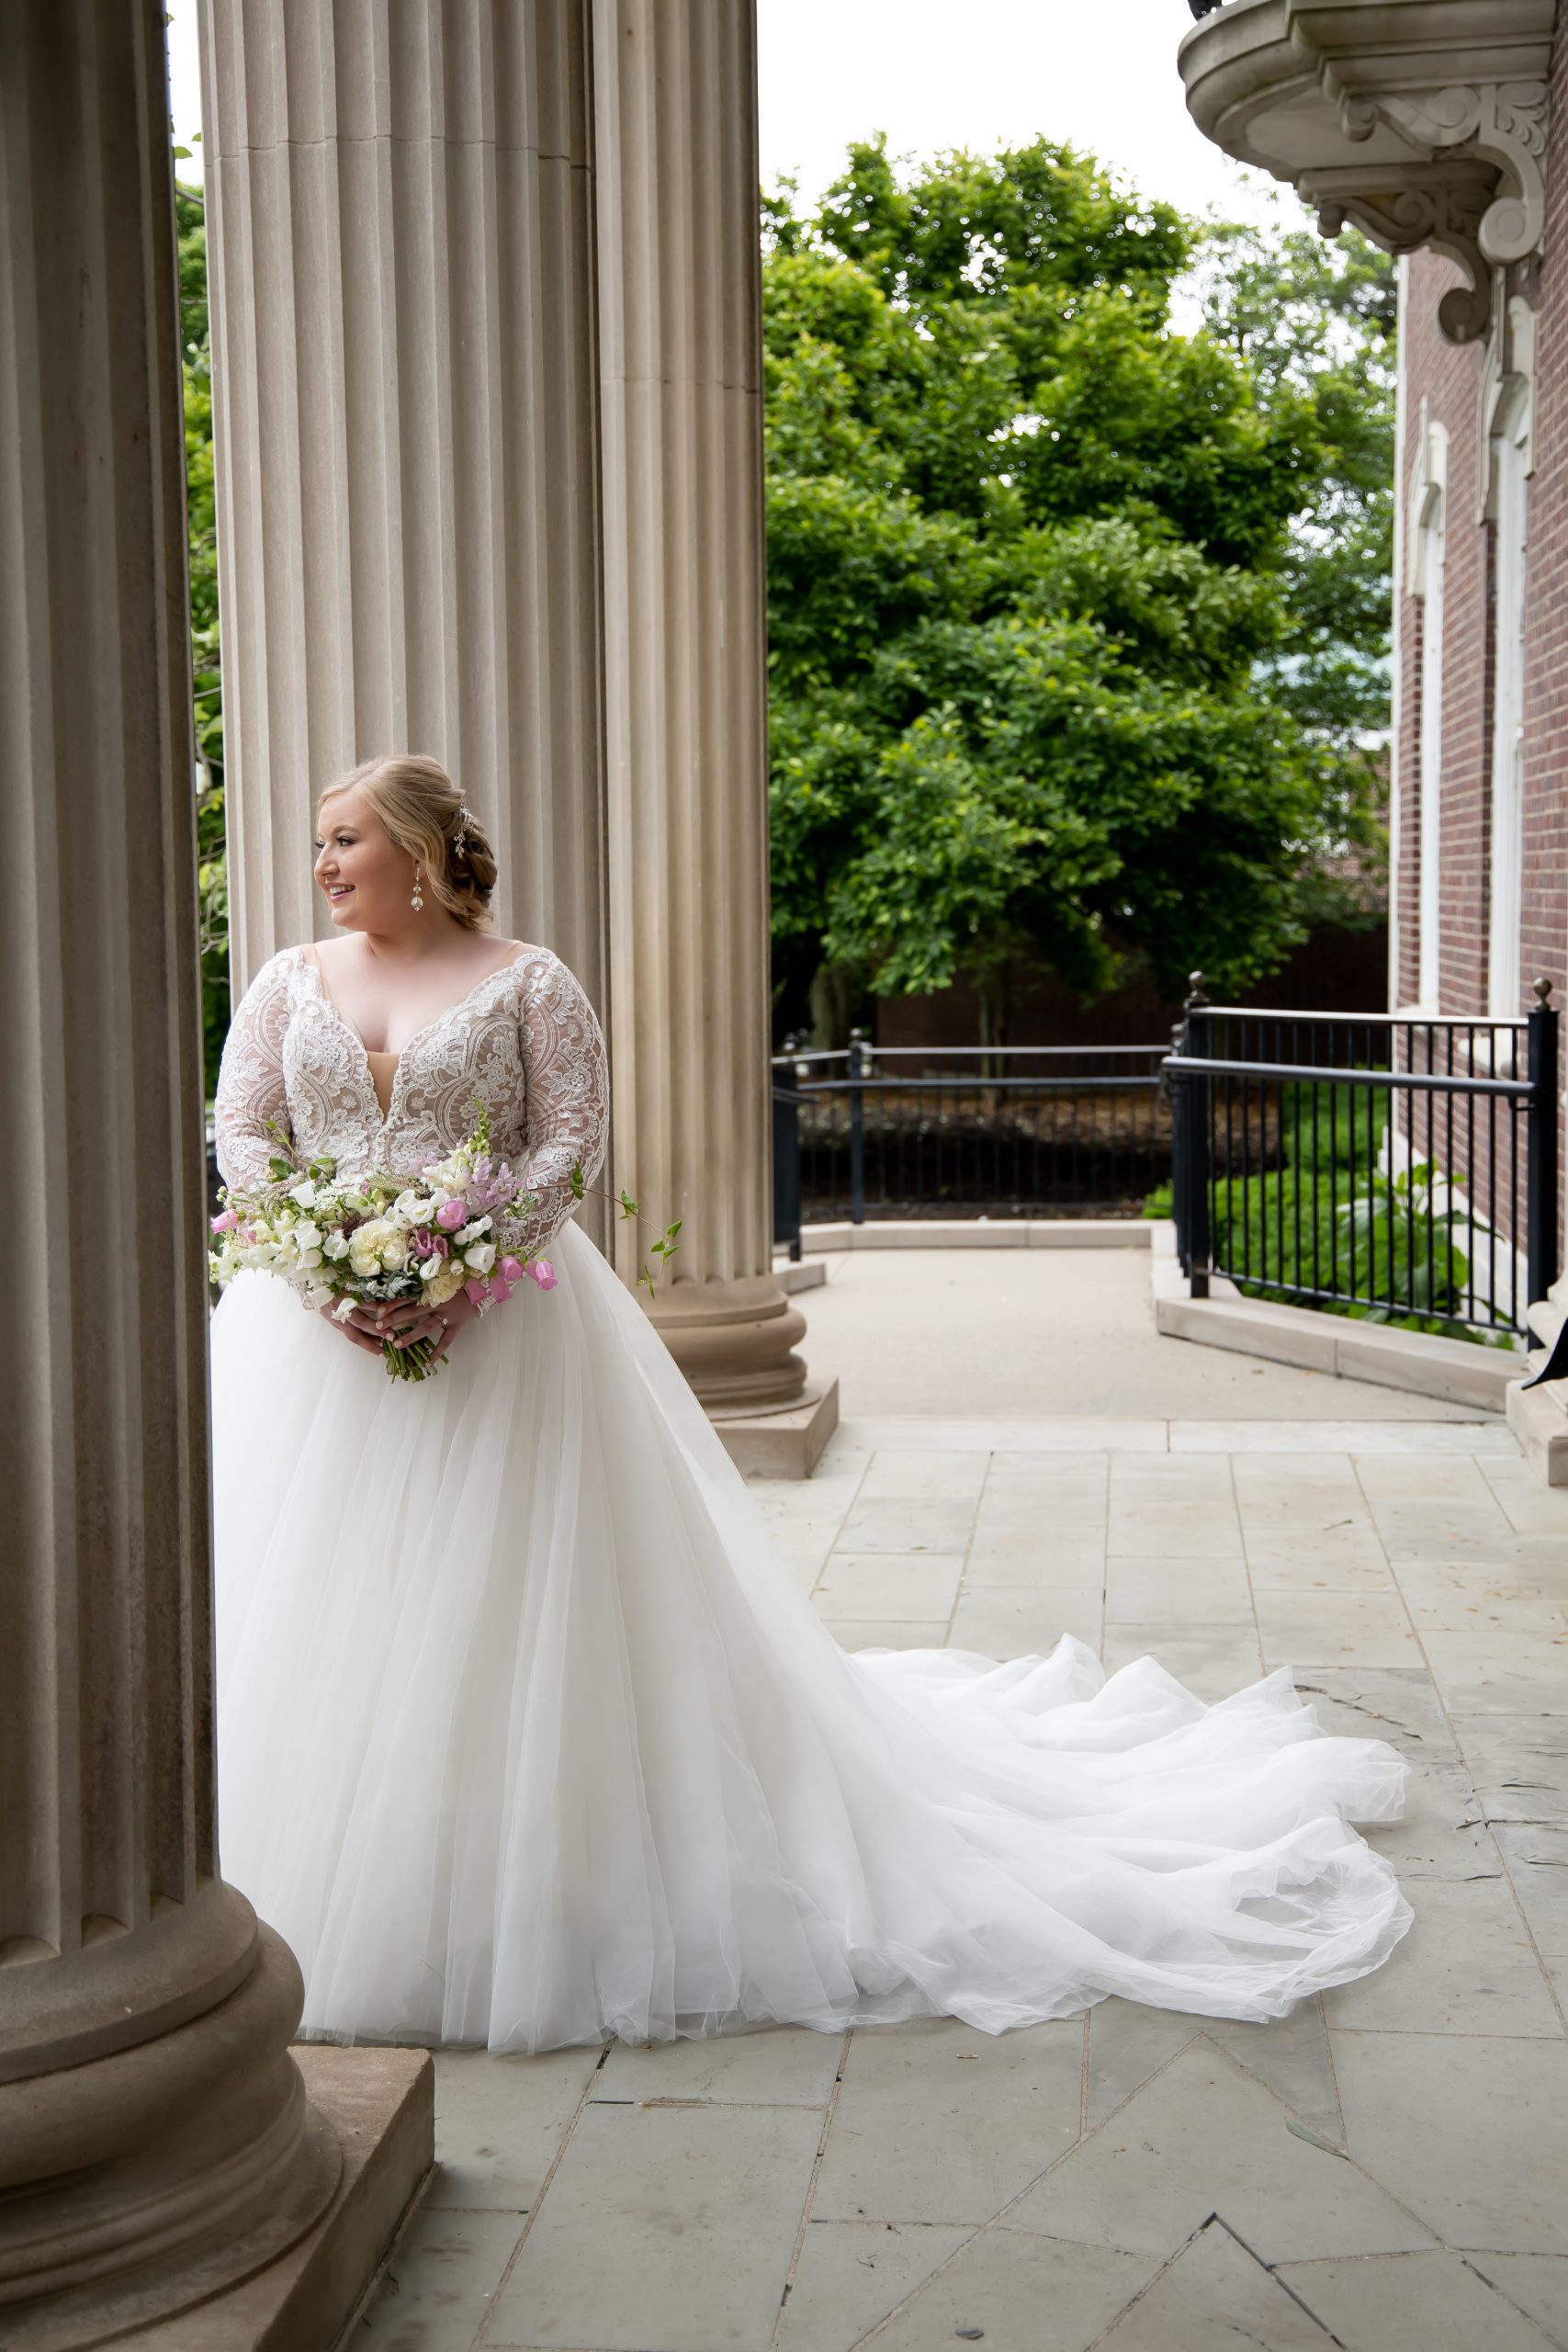 Bride Wearing Wedding Dresses London Called Mallory Dawn By Maggie Sottero In Front Of Pillars With Groom